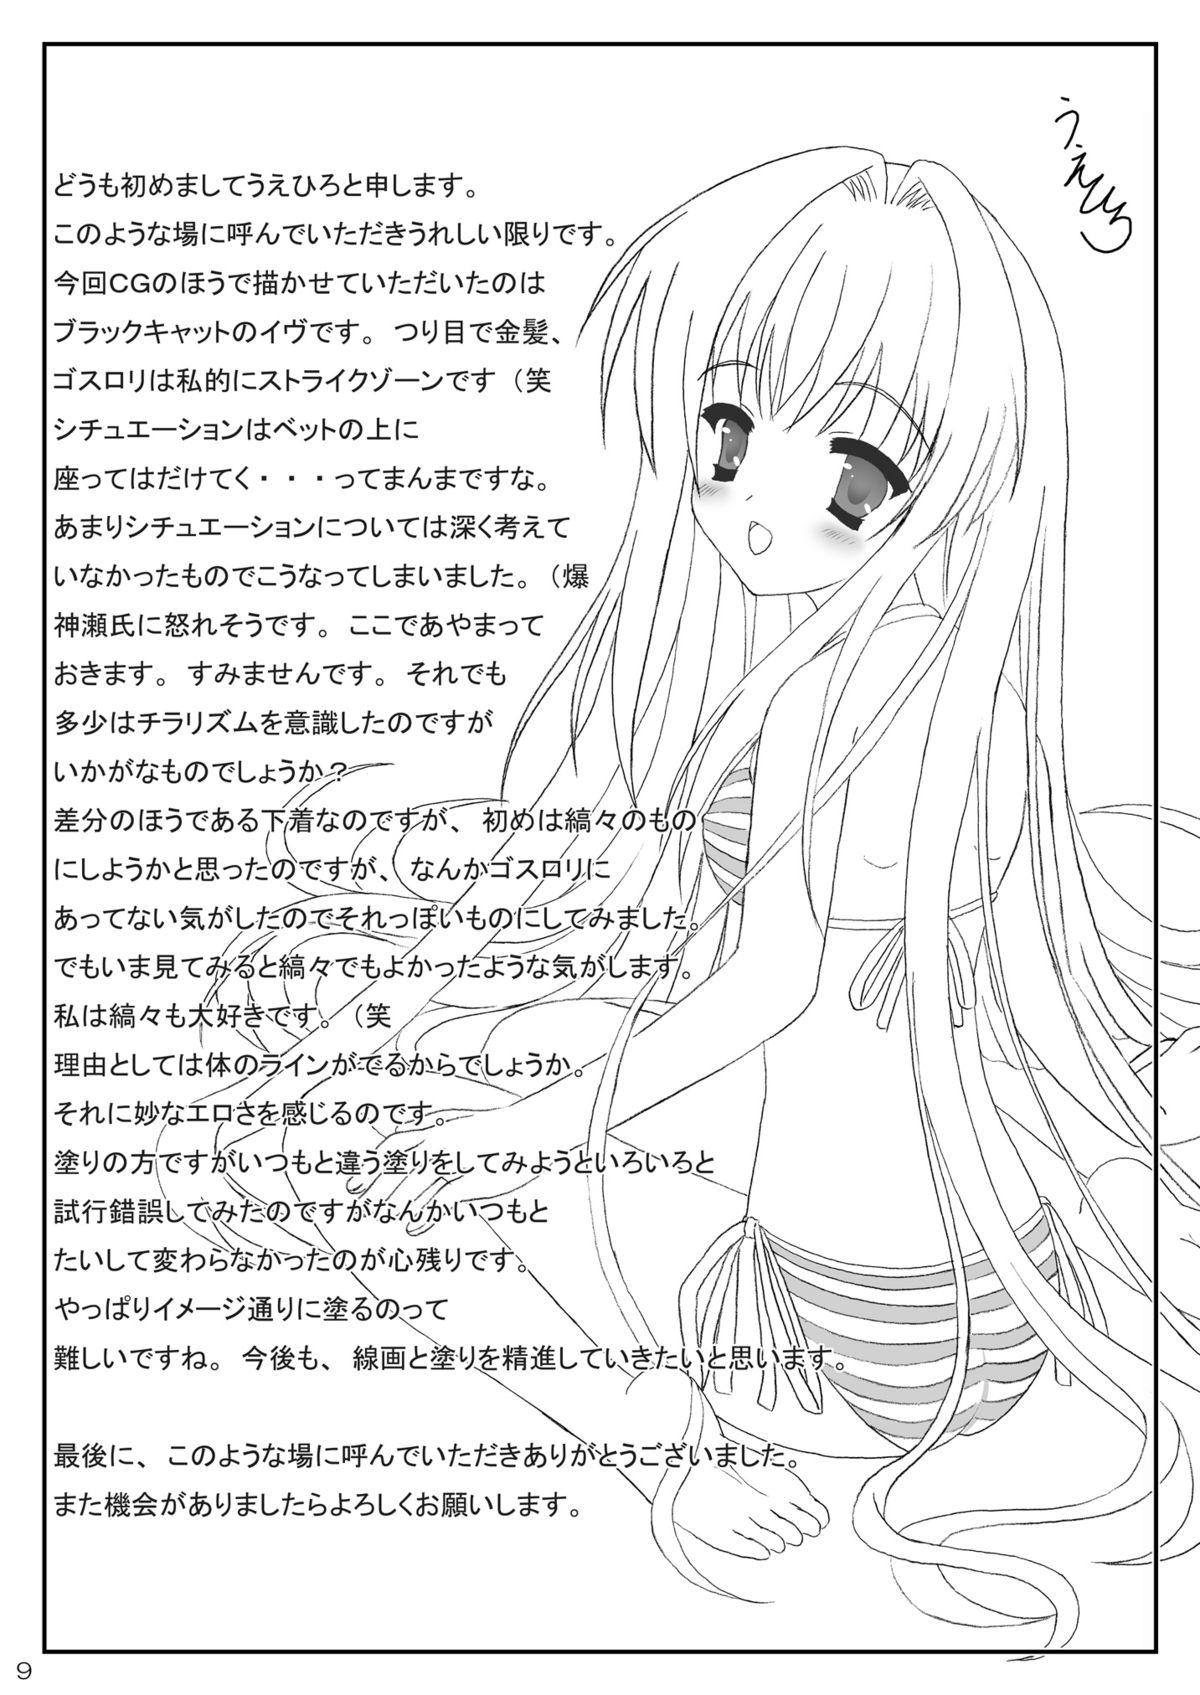 Oralsex Situation Maniacs vol.0.5 Omake Hon - Fate stay night Foot Job - Page 14